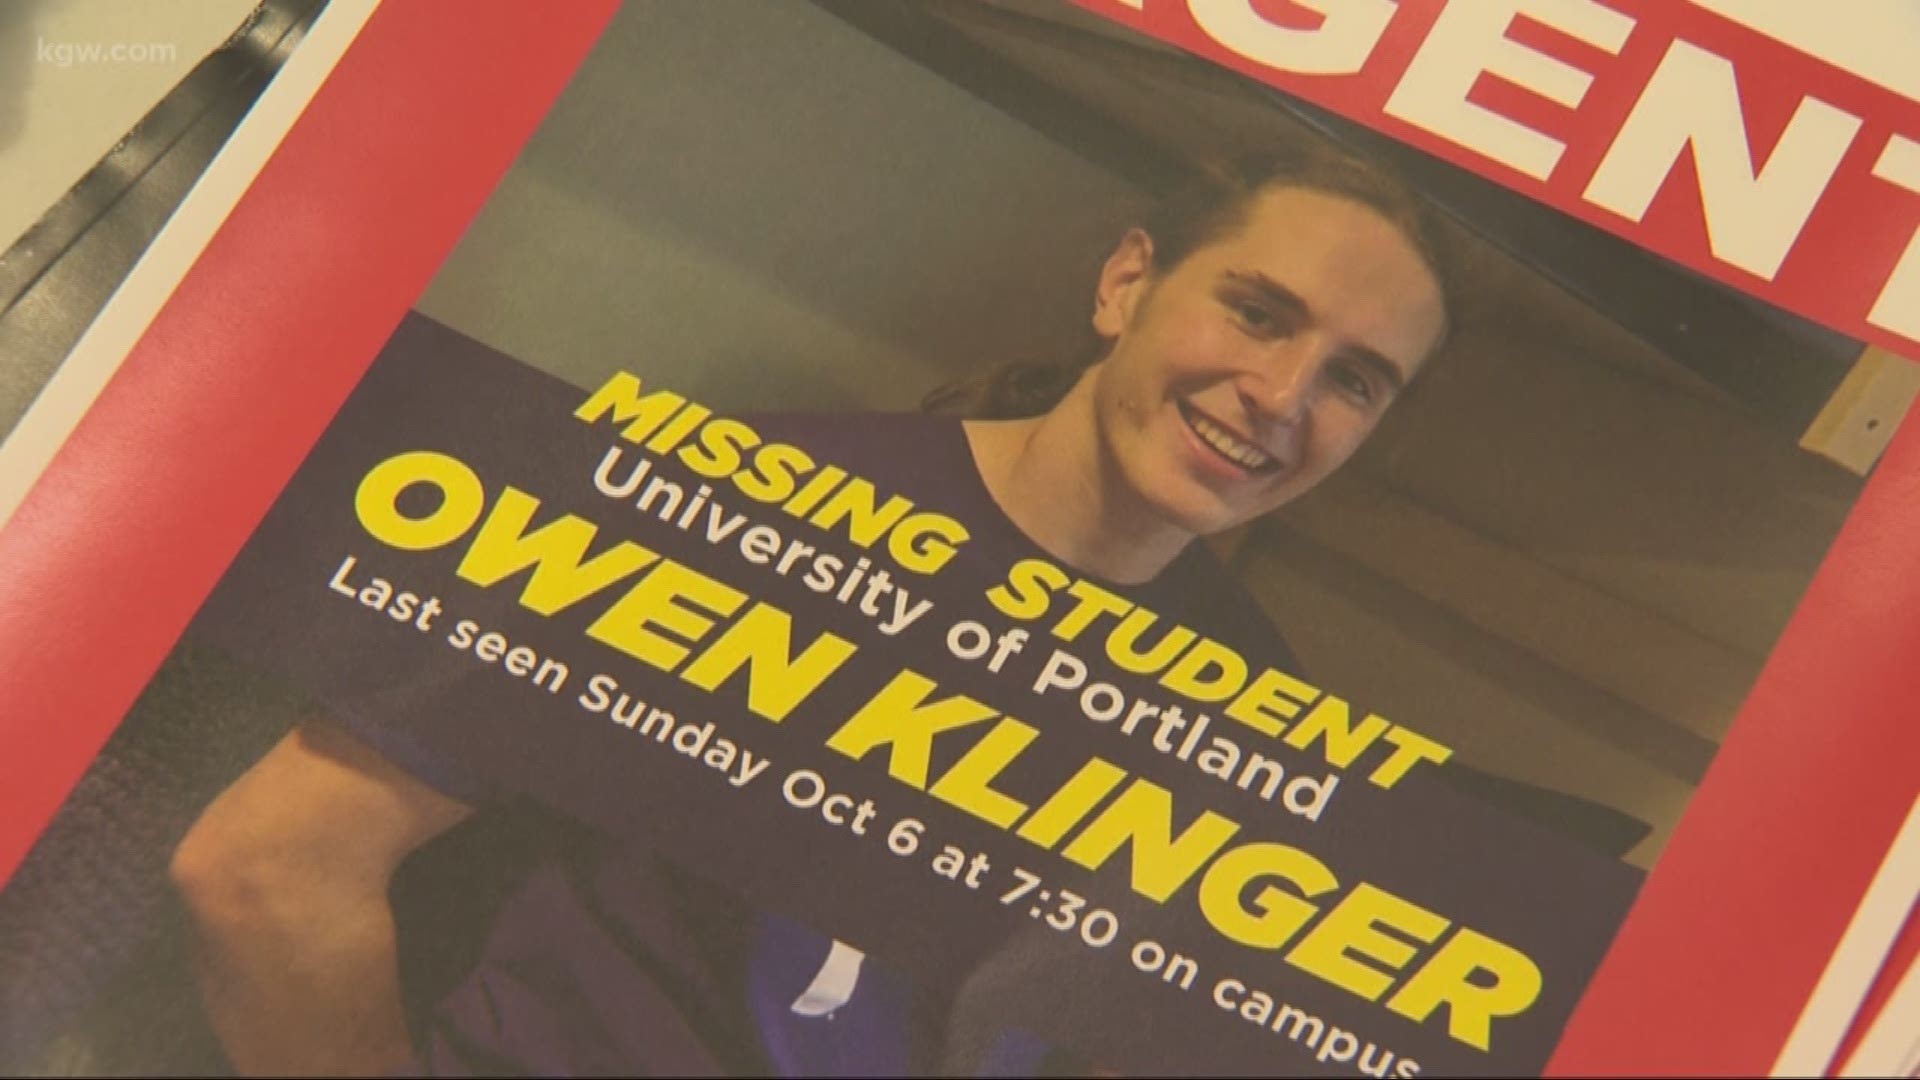 18-year-old Owen Klinger is missing. Friends and family posted flyers and searched for the college freshman in North Portland on Tuesday.